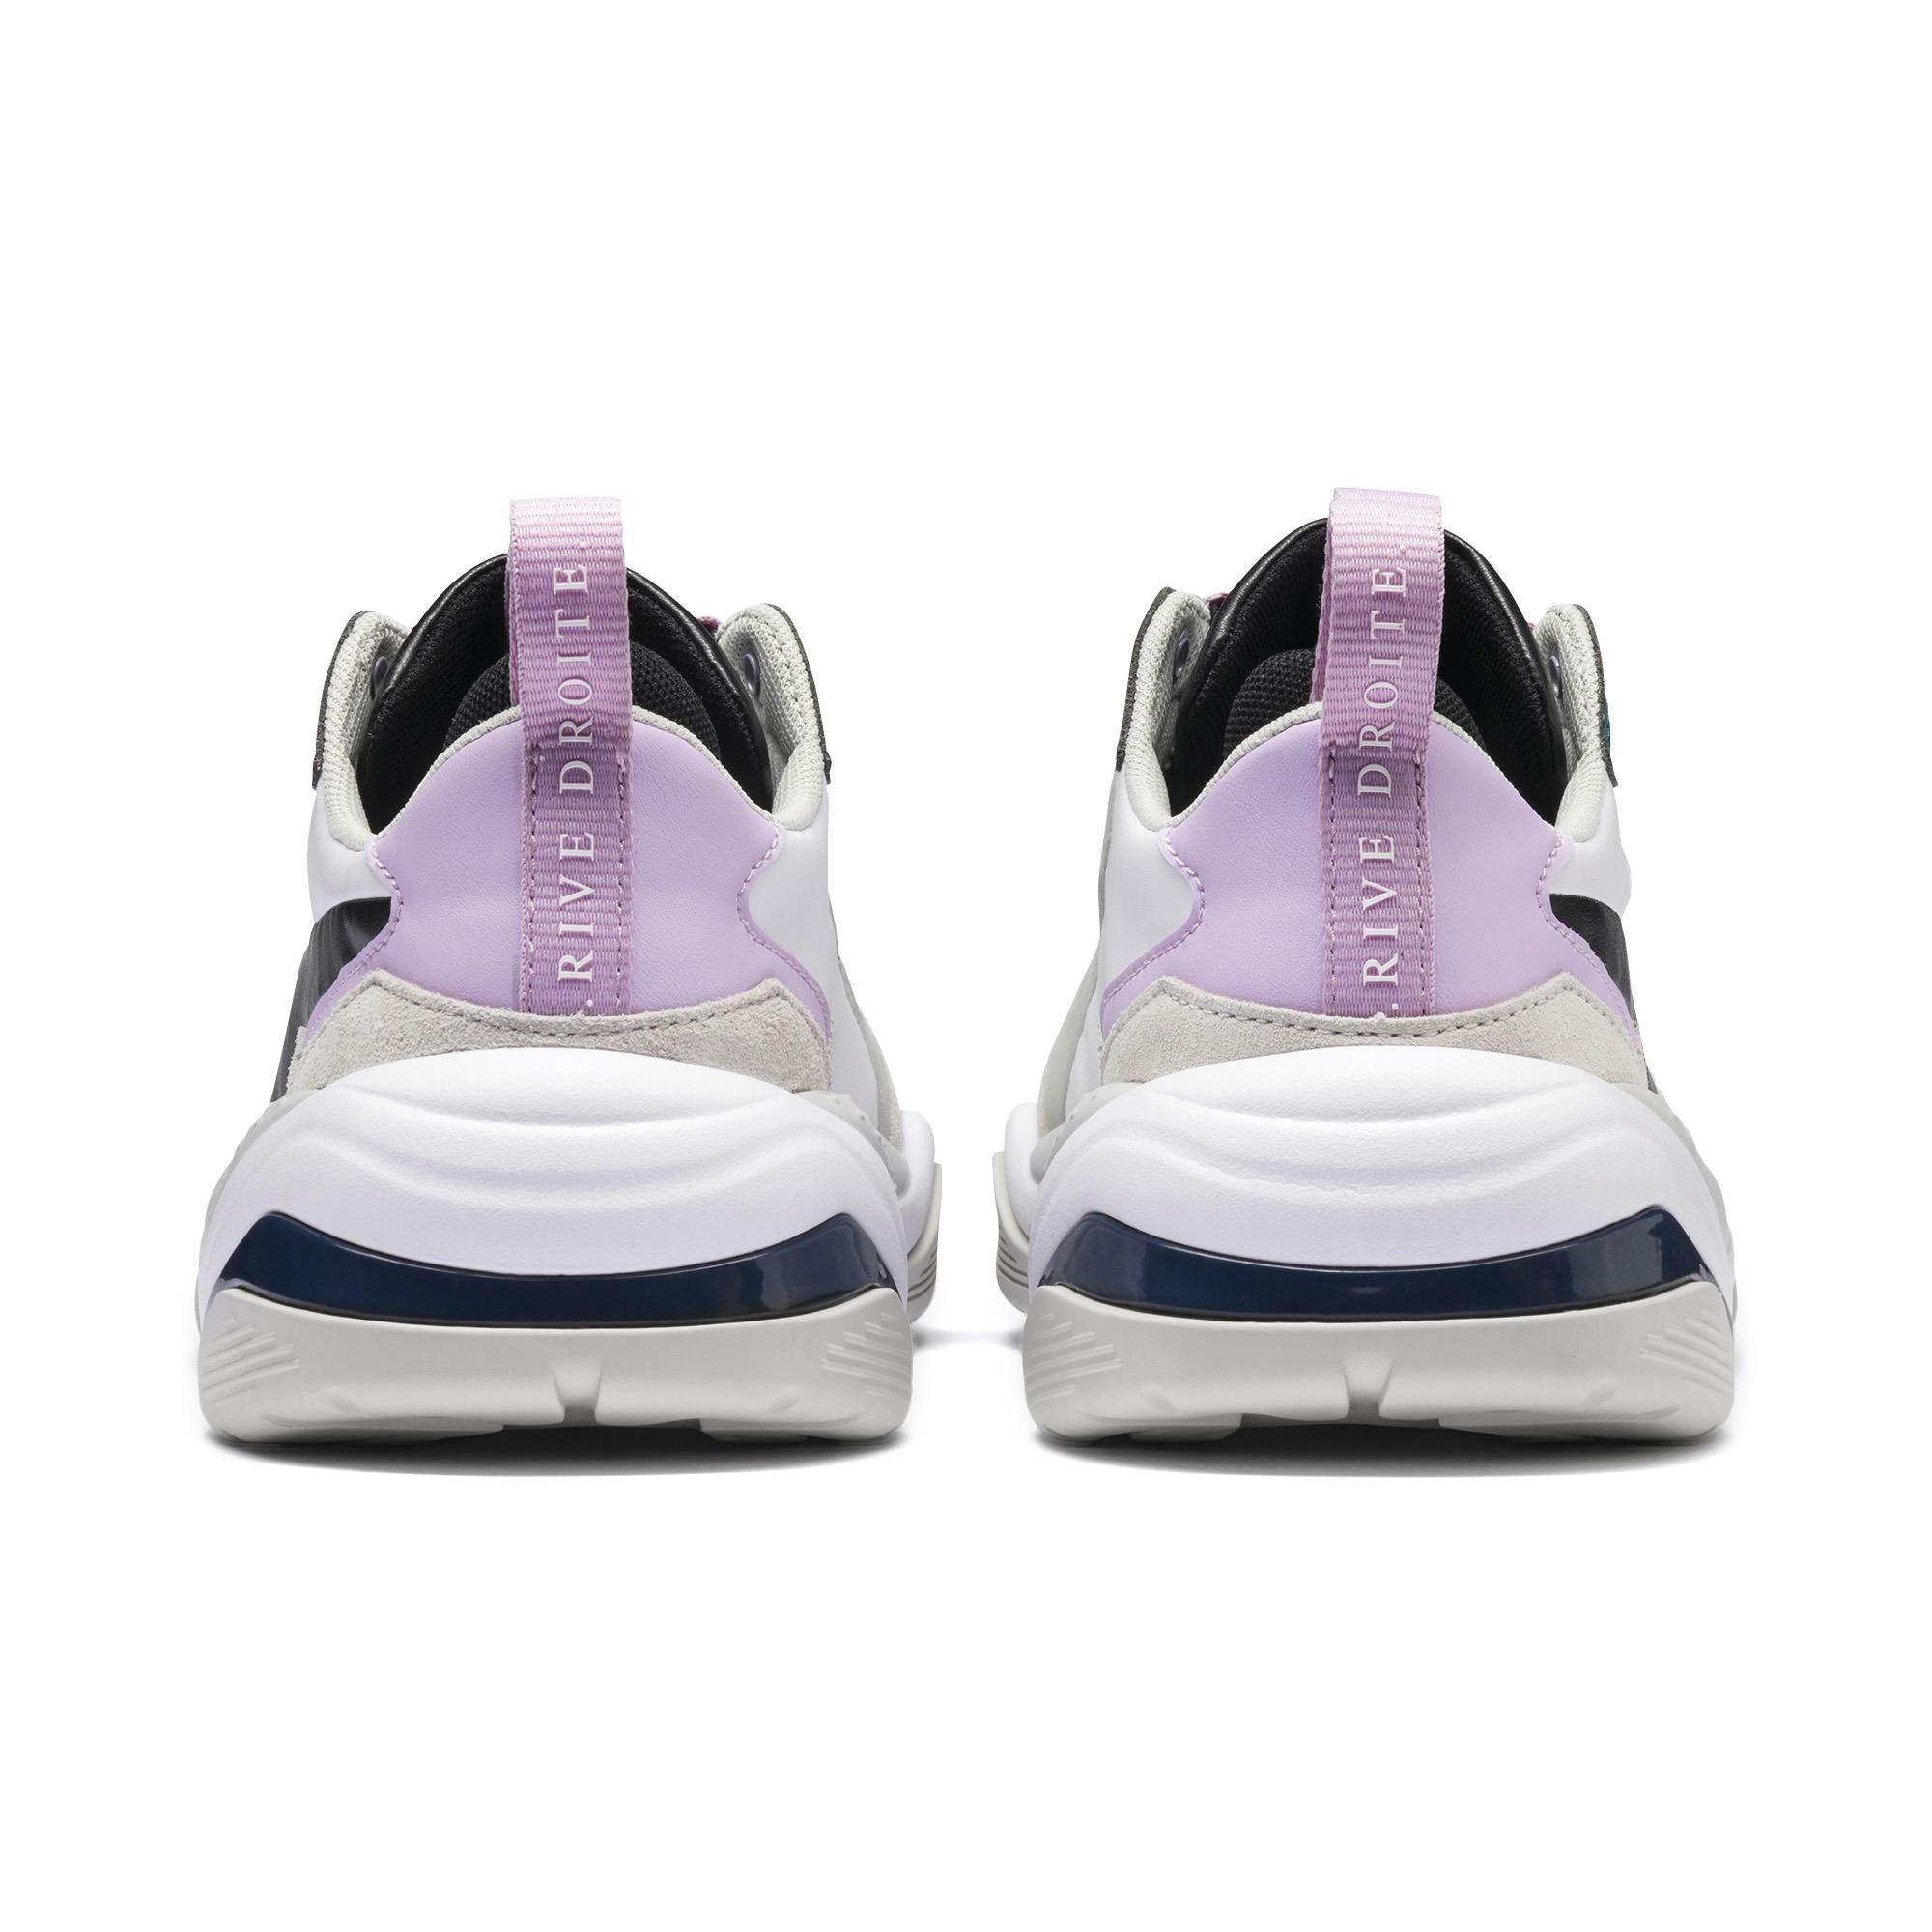 PUMA Lace Thunder Rive Droite Women's Sneakers - Lyst